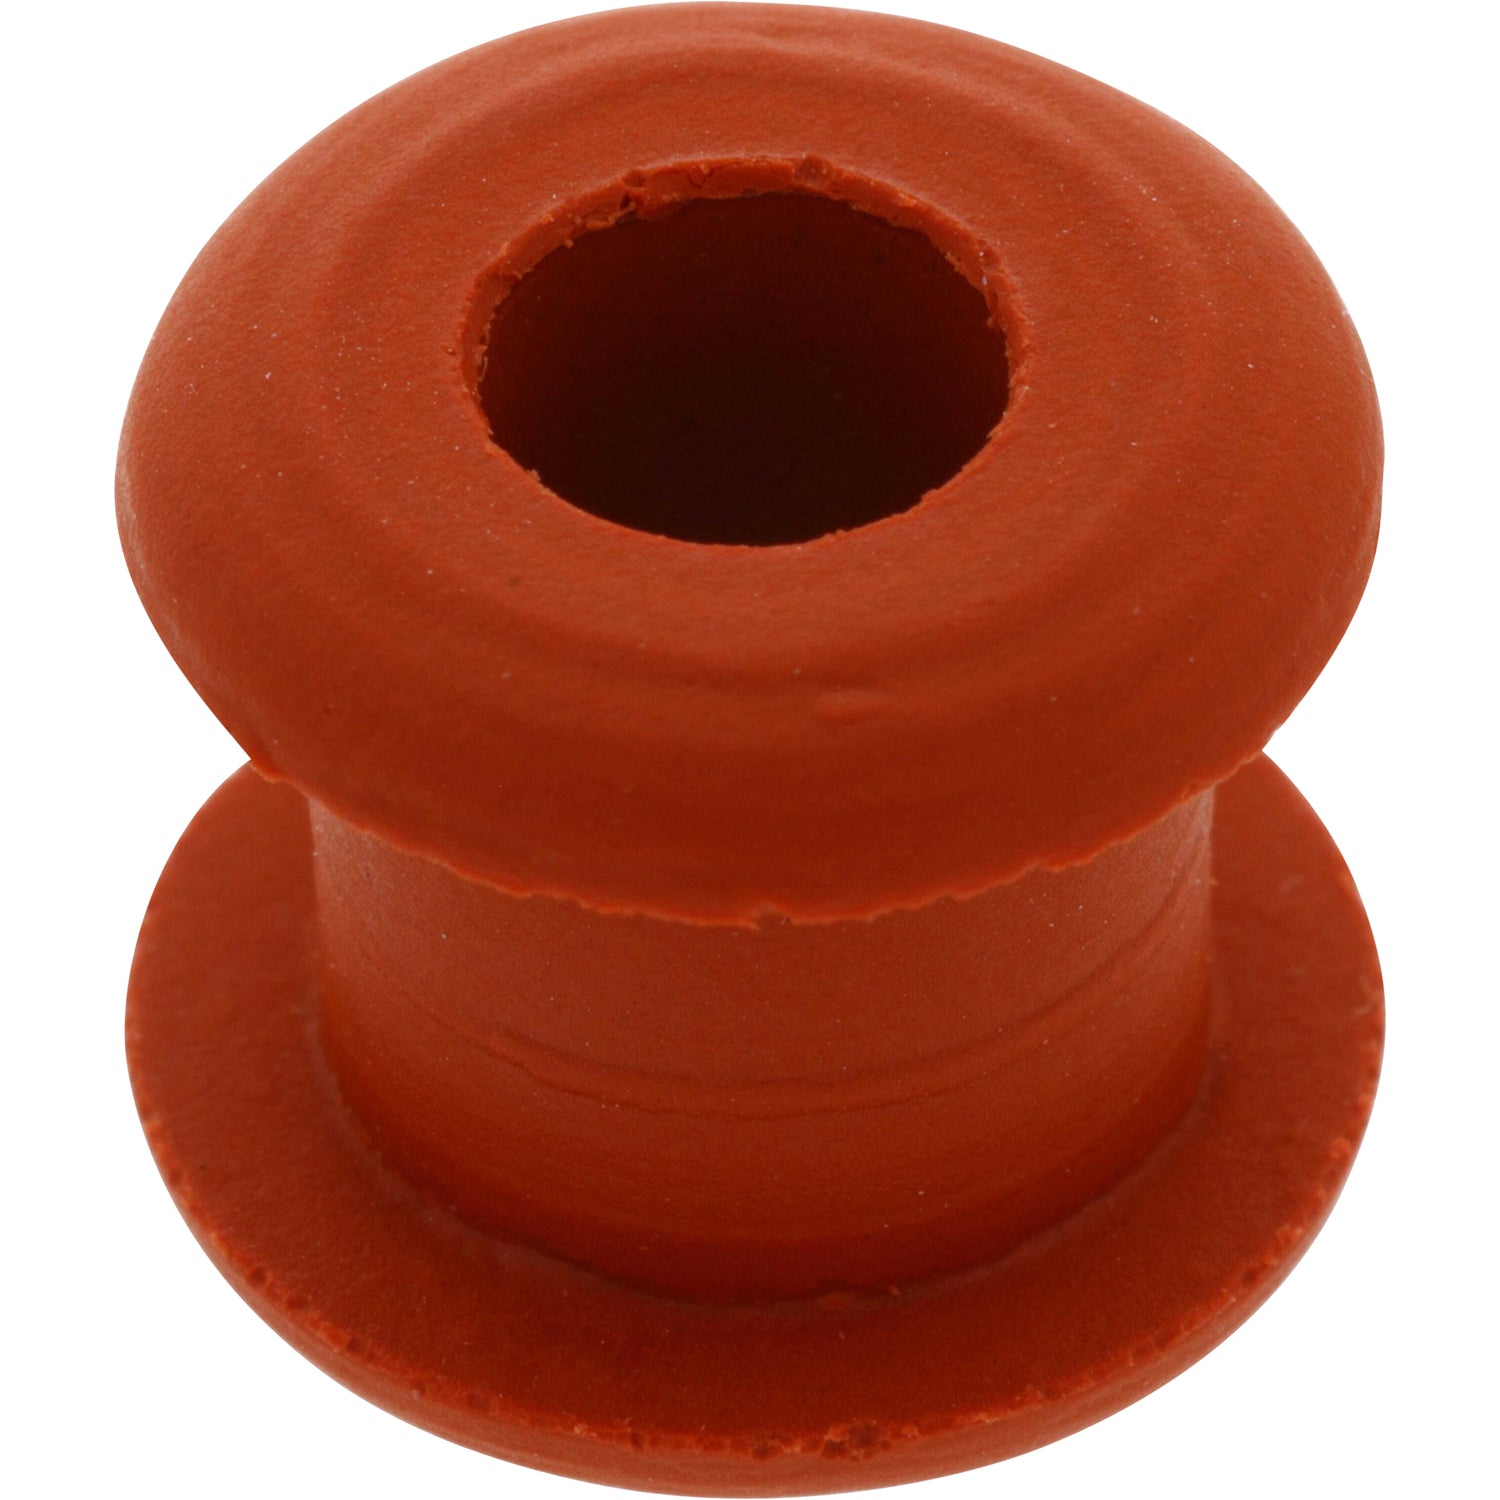 Red silicone rubber grommet with hole cut through center. 1061T82